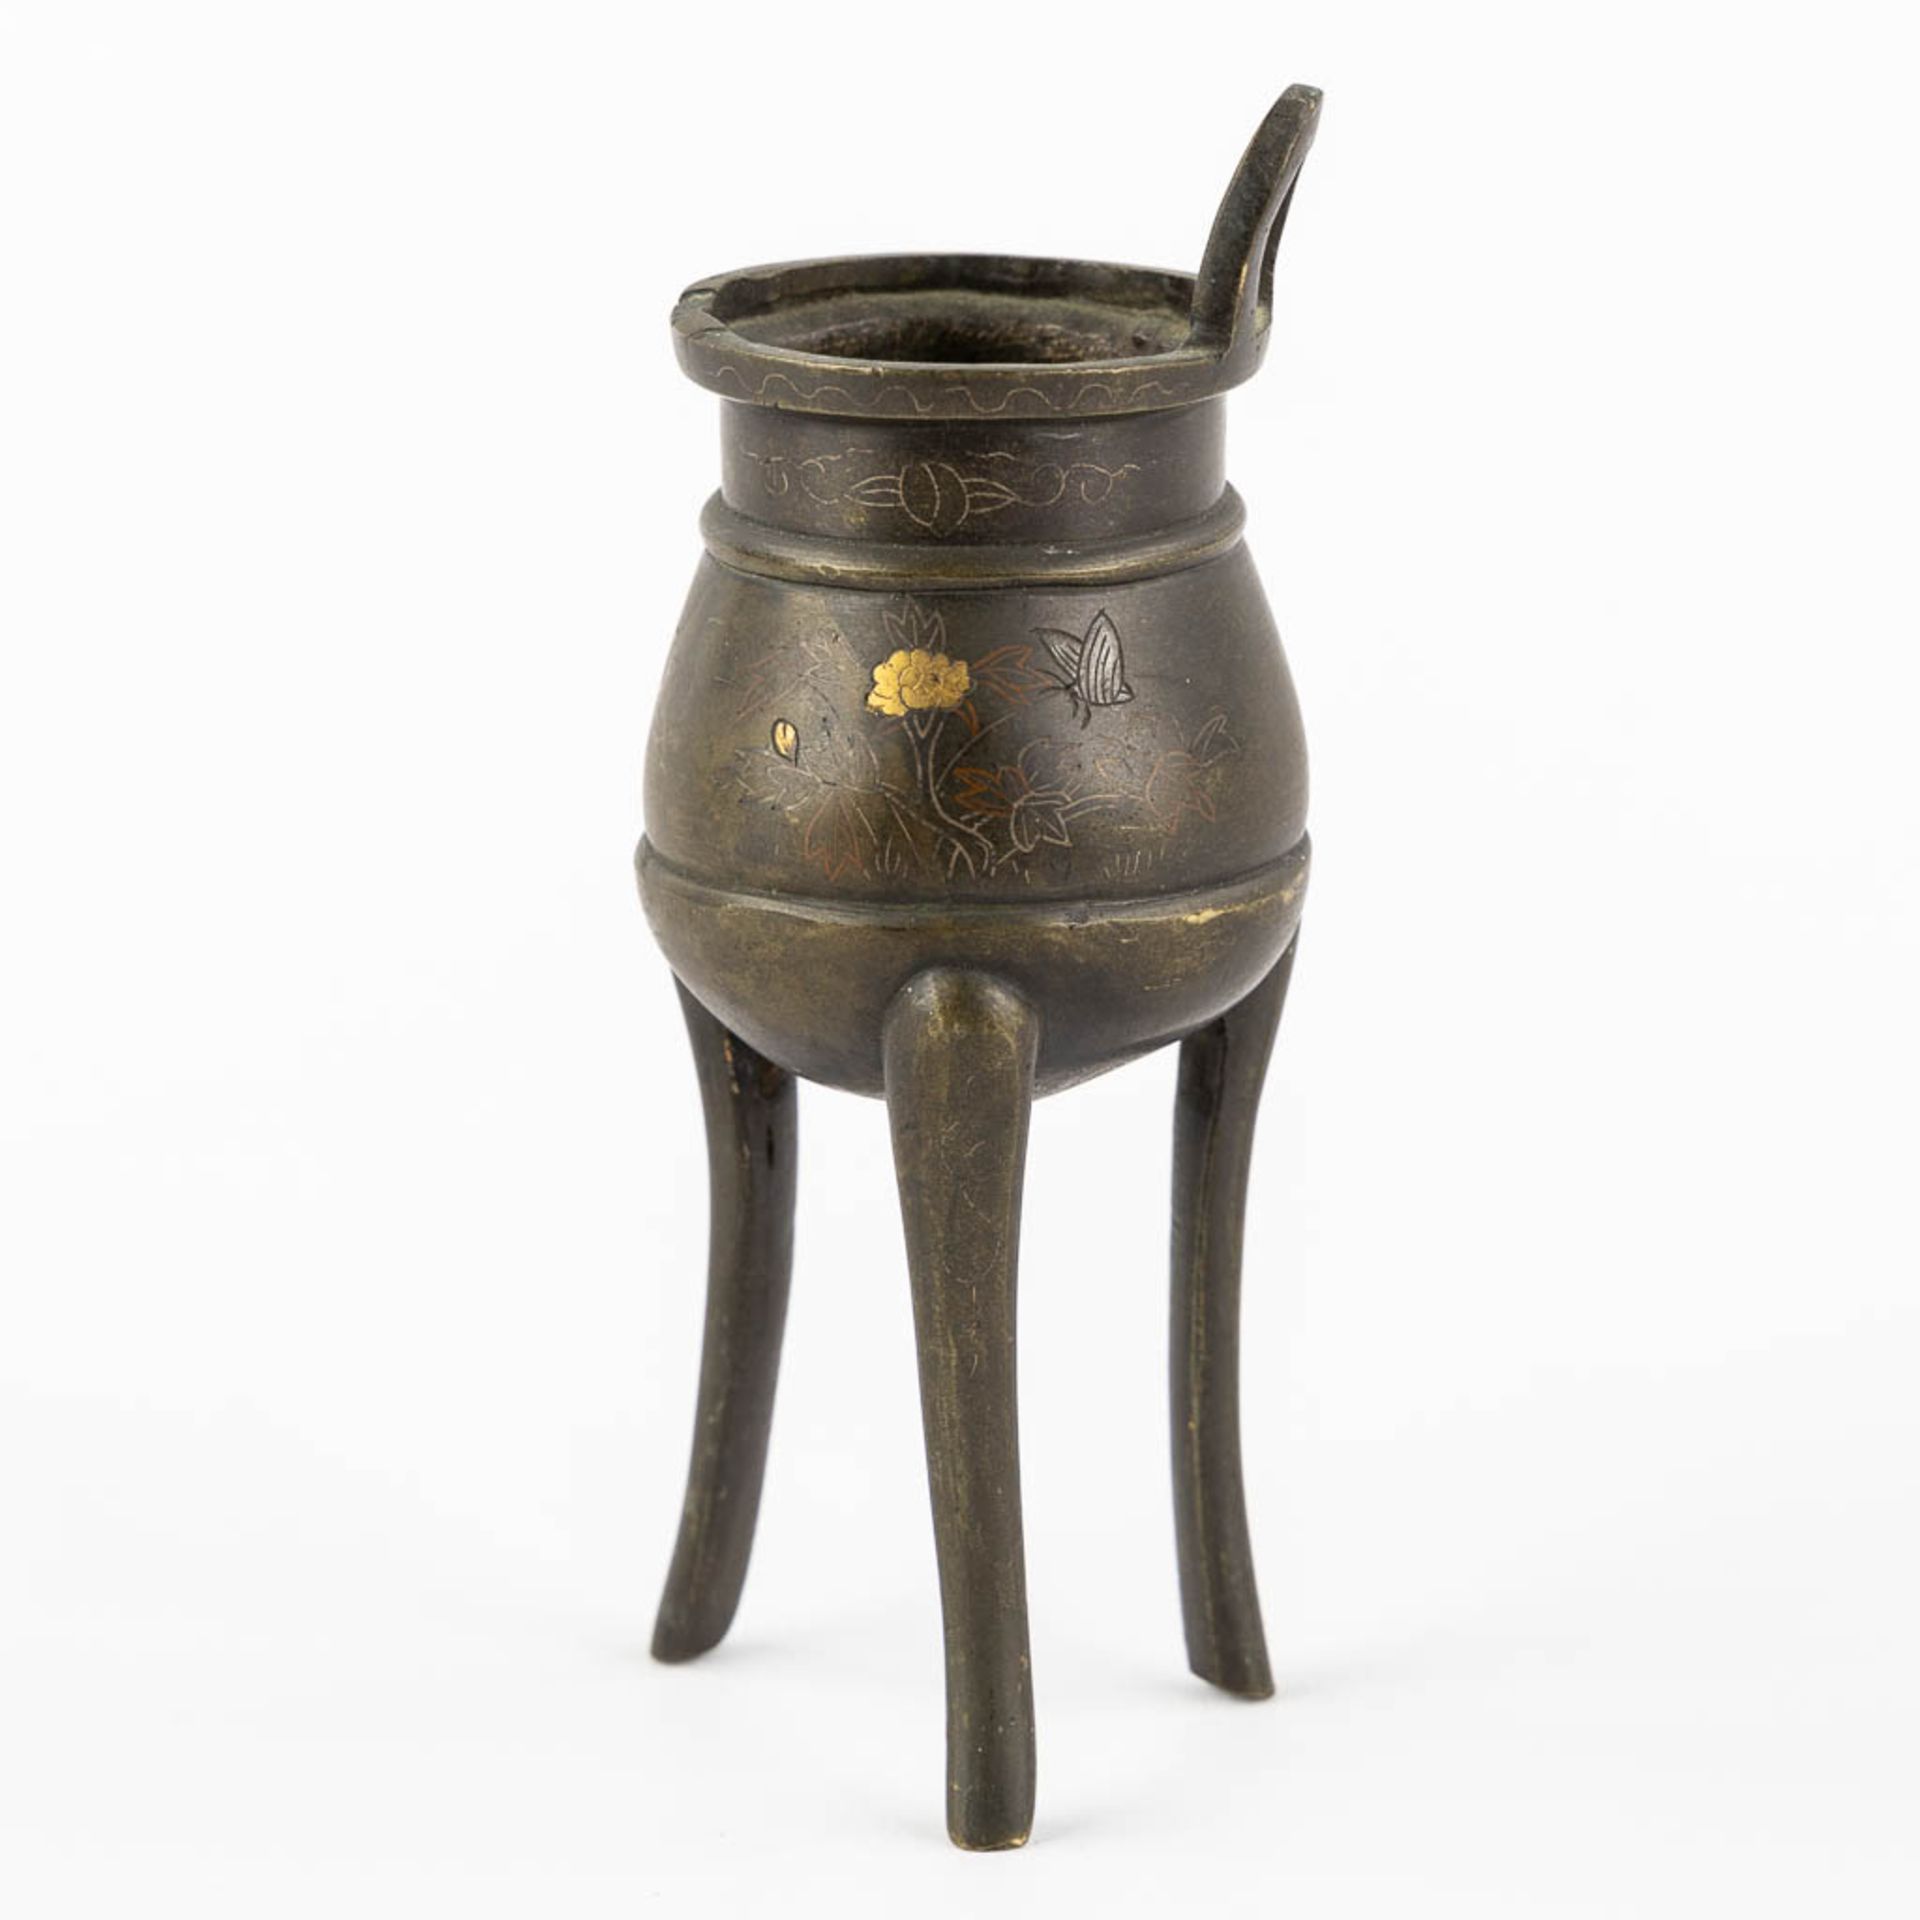 A Chinese insence burner, vase and a lucky coin. Bronze. (H:19 x D:5 cm) - Image 10 of 19